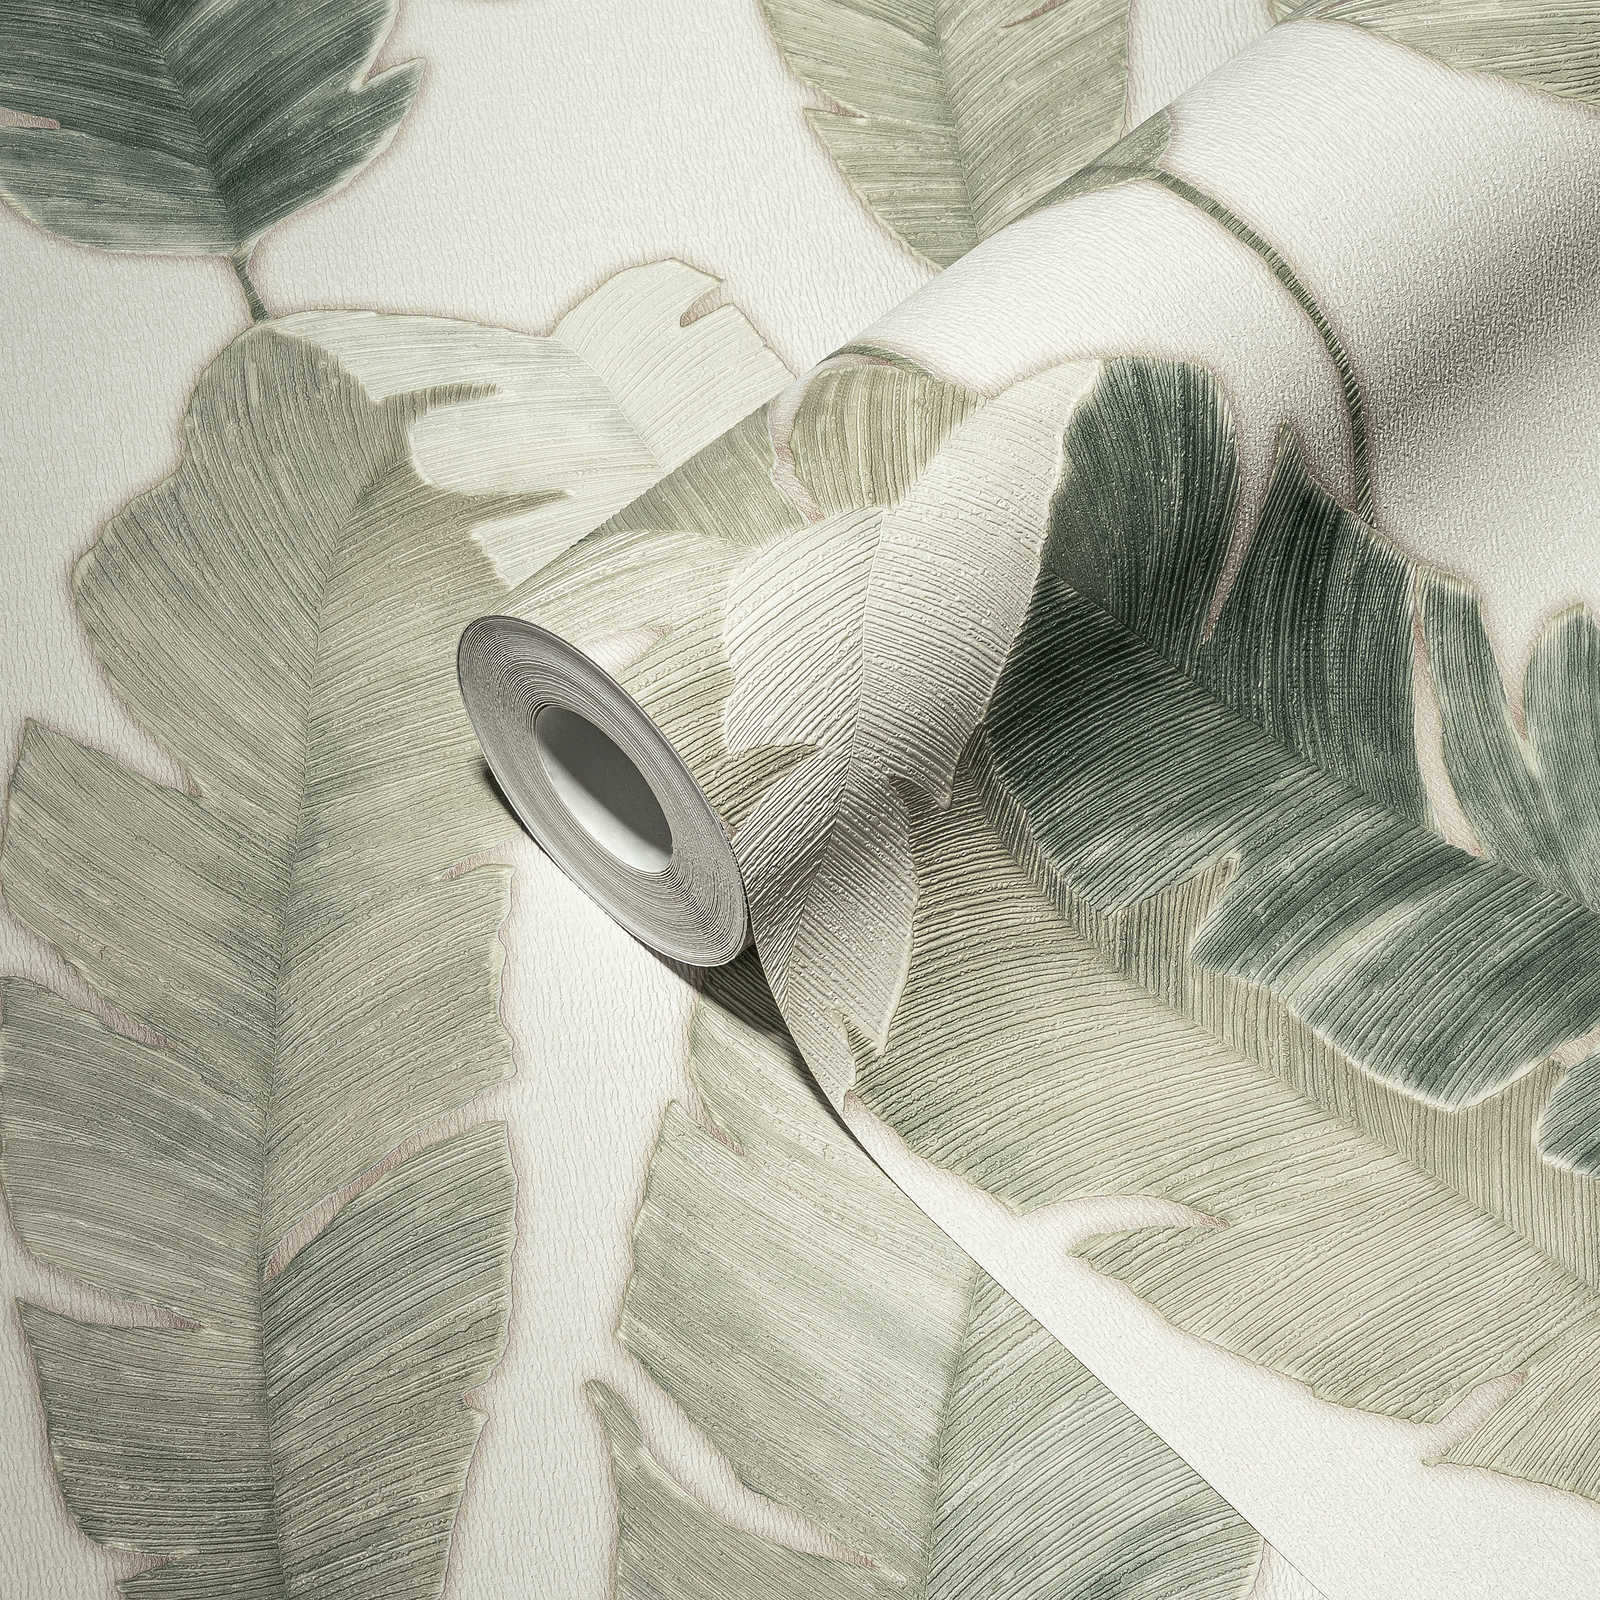             Non-woven wallpaper with palm leaves in light colour - white, green, blue
        